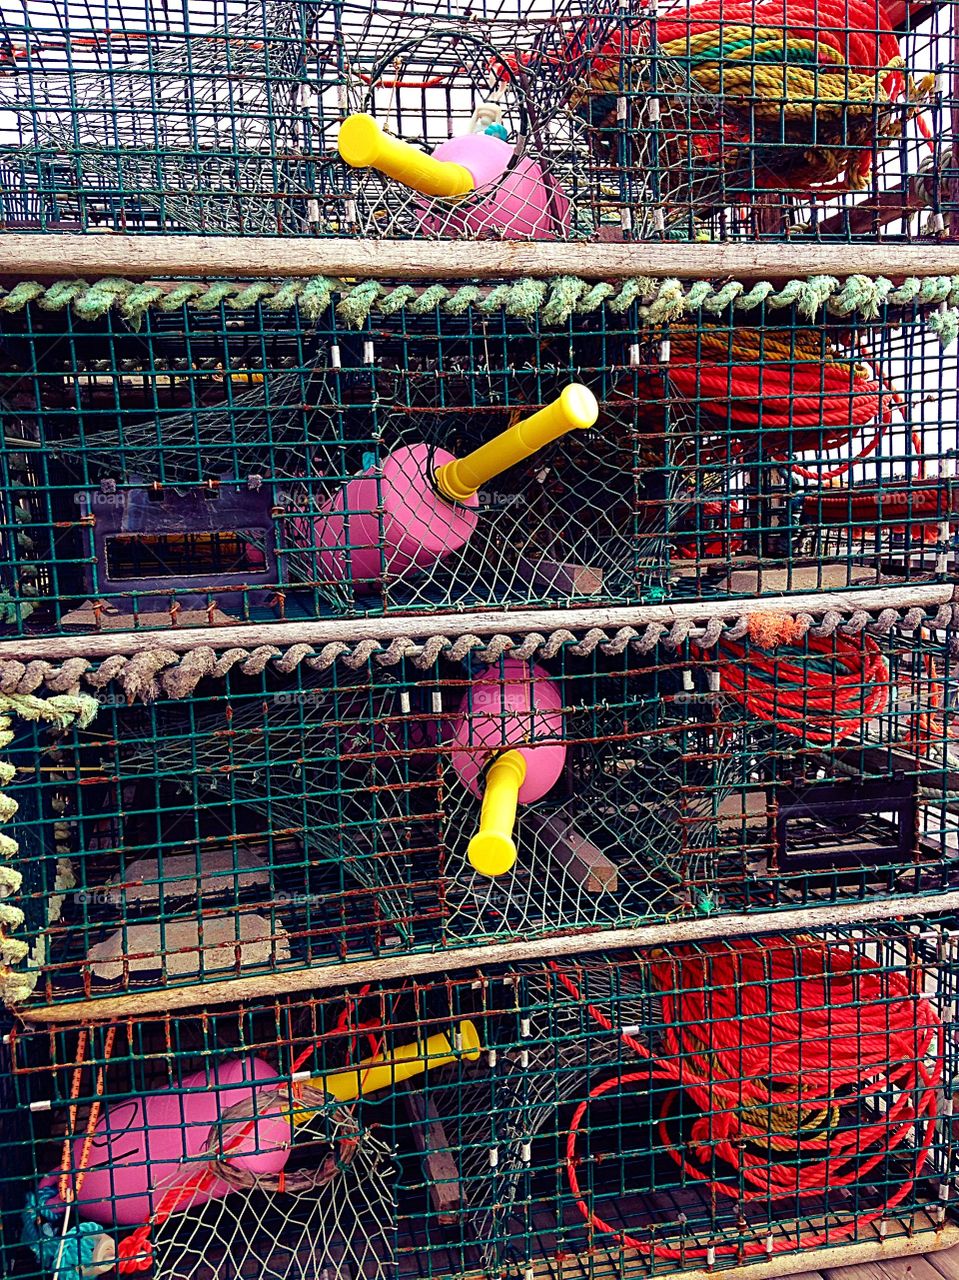 Trapped . Lobster traps ready for the season